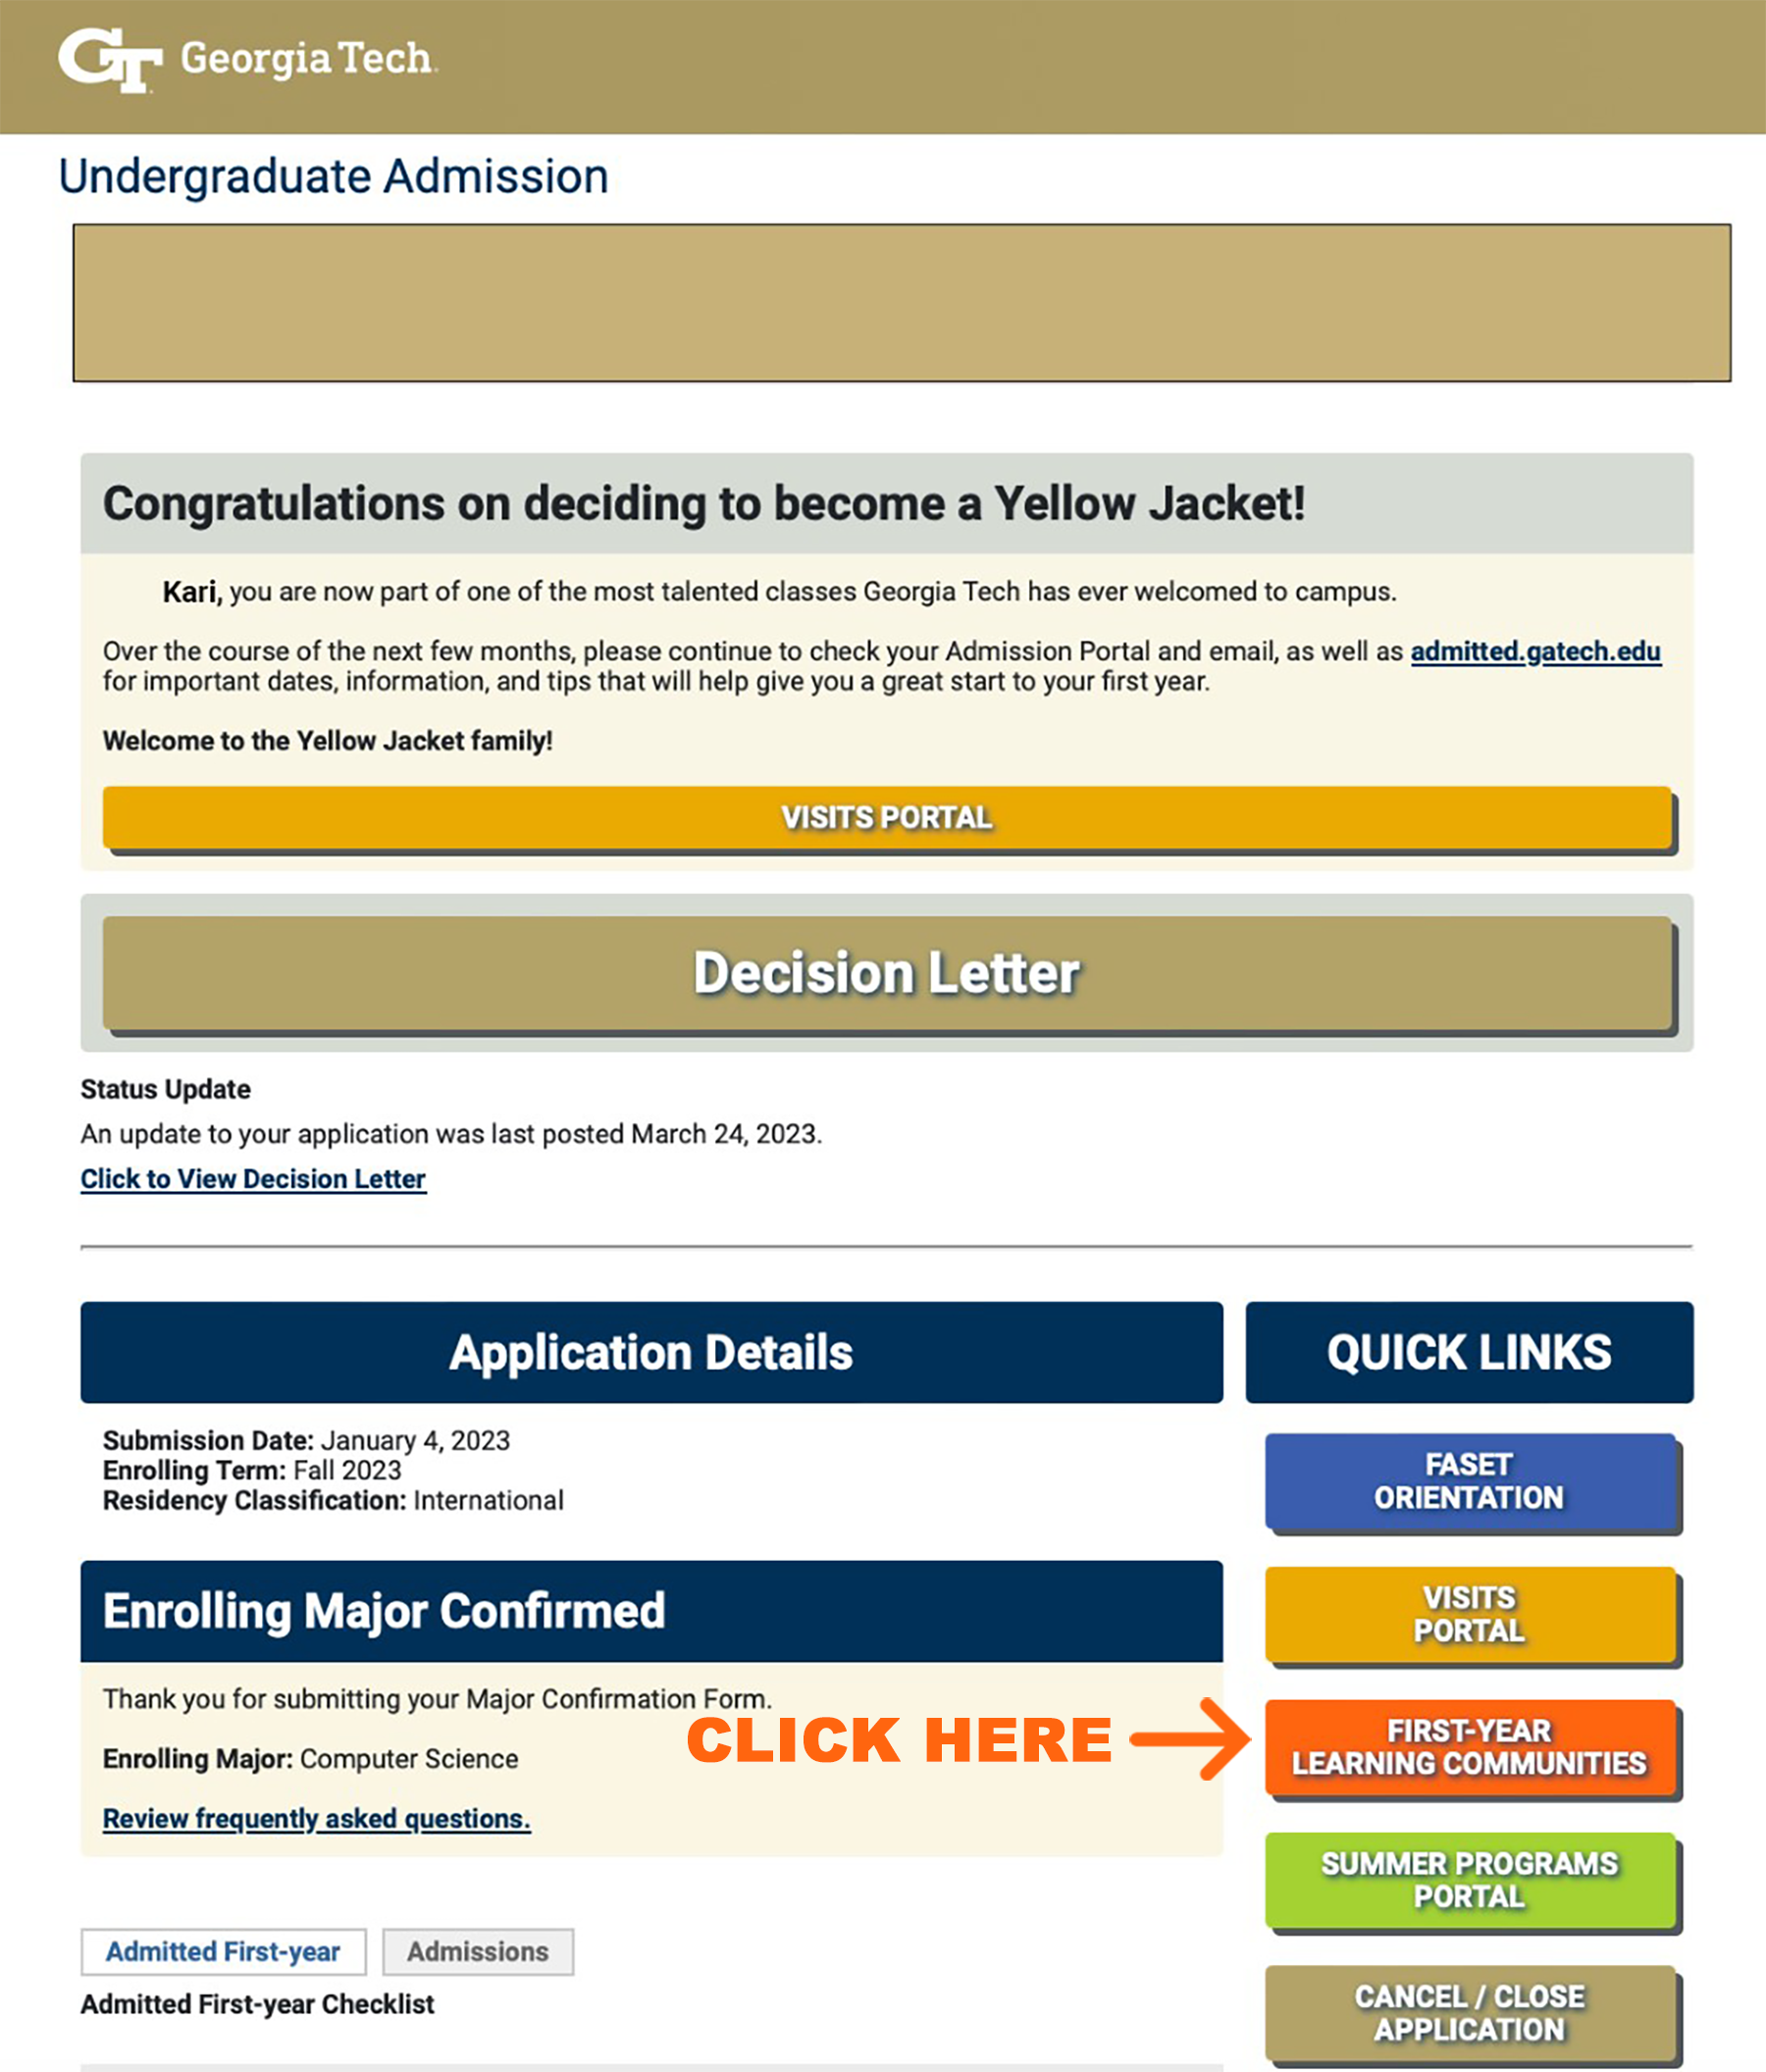 View of the admissions portal